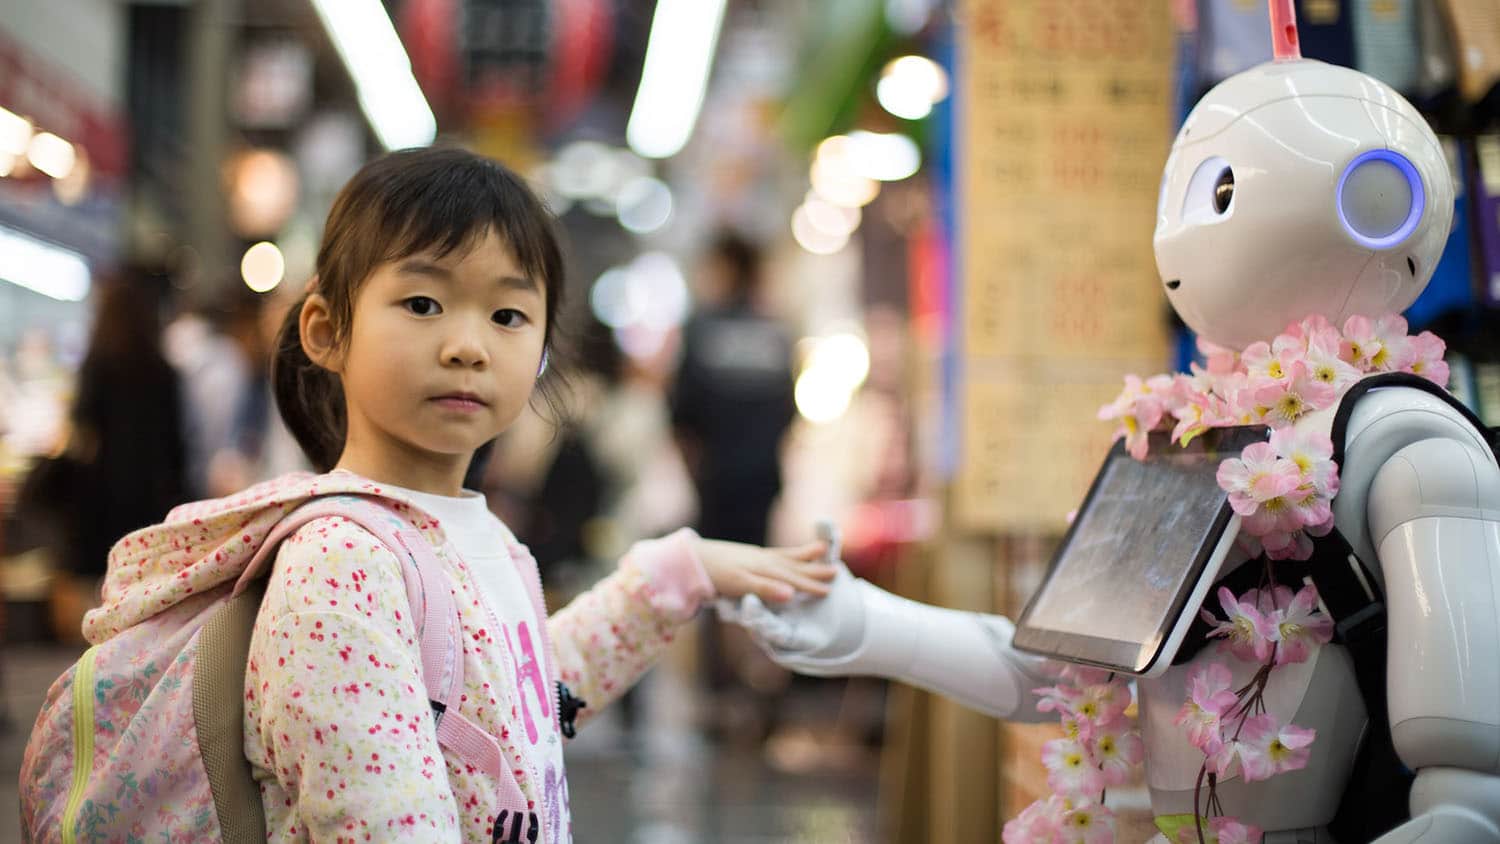 A young girl of East Asian descent touches hands with a robot.